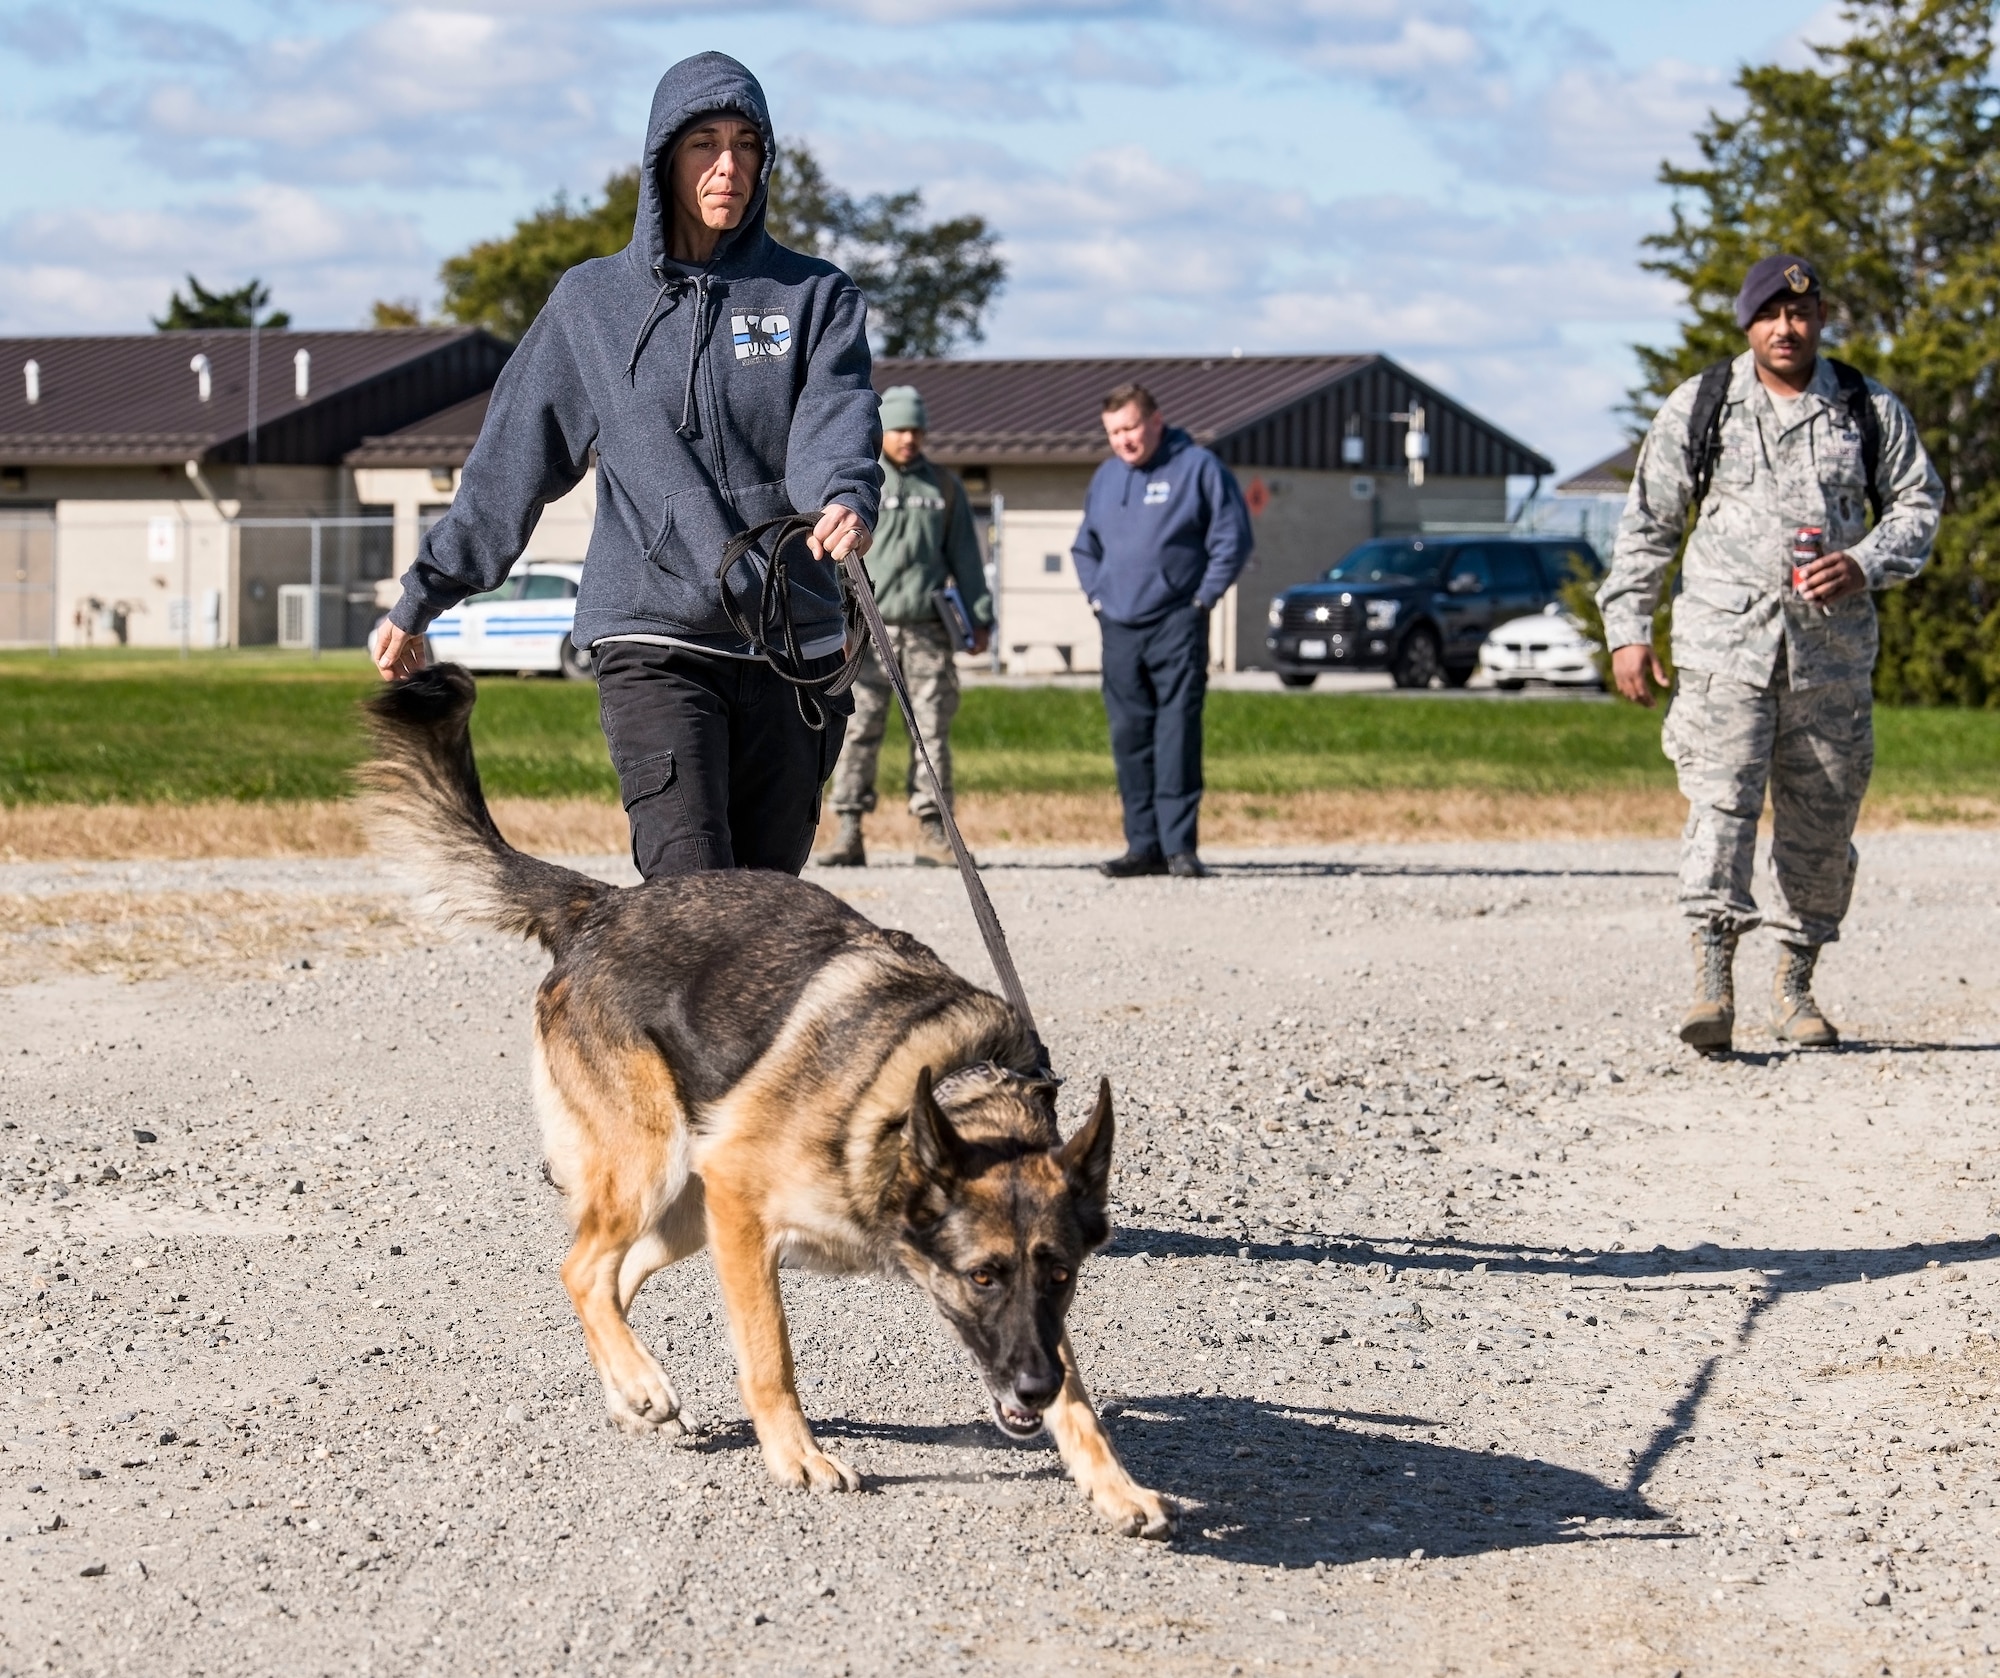 Sgt. Katie Edgar, Worcester County, Md., Sheriff’s Department K-9 Unit supervisor, along with her partner, “Brina,” a three-year-old German Shepherd narcotics detection dog, search for hidden narcotics Oct. 24, 2018, at Dover Air Force Base, Del. Tech. Sgt. Dominique Singleton, right, 436th Security Forces Squadron military working dog kennel master, set up two separate areas containing narcotics or explosives. (U.S. Air Force photo by Roland Balik)